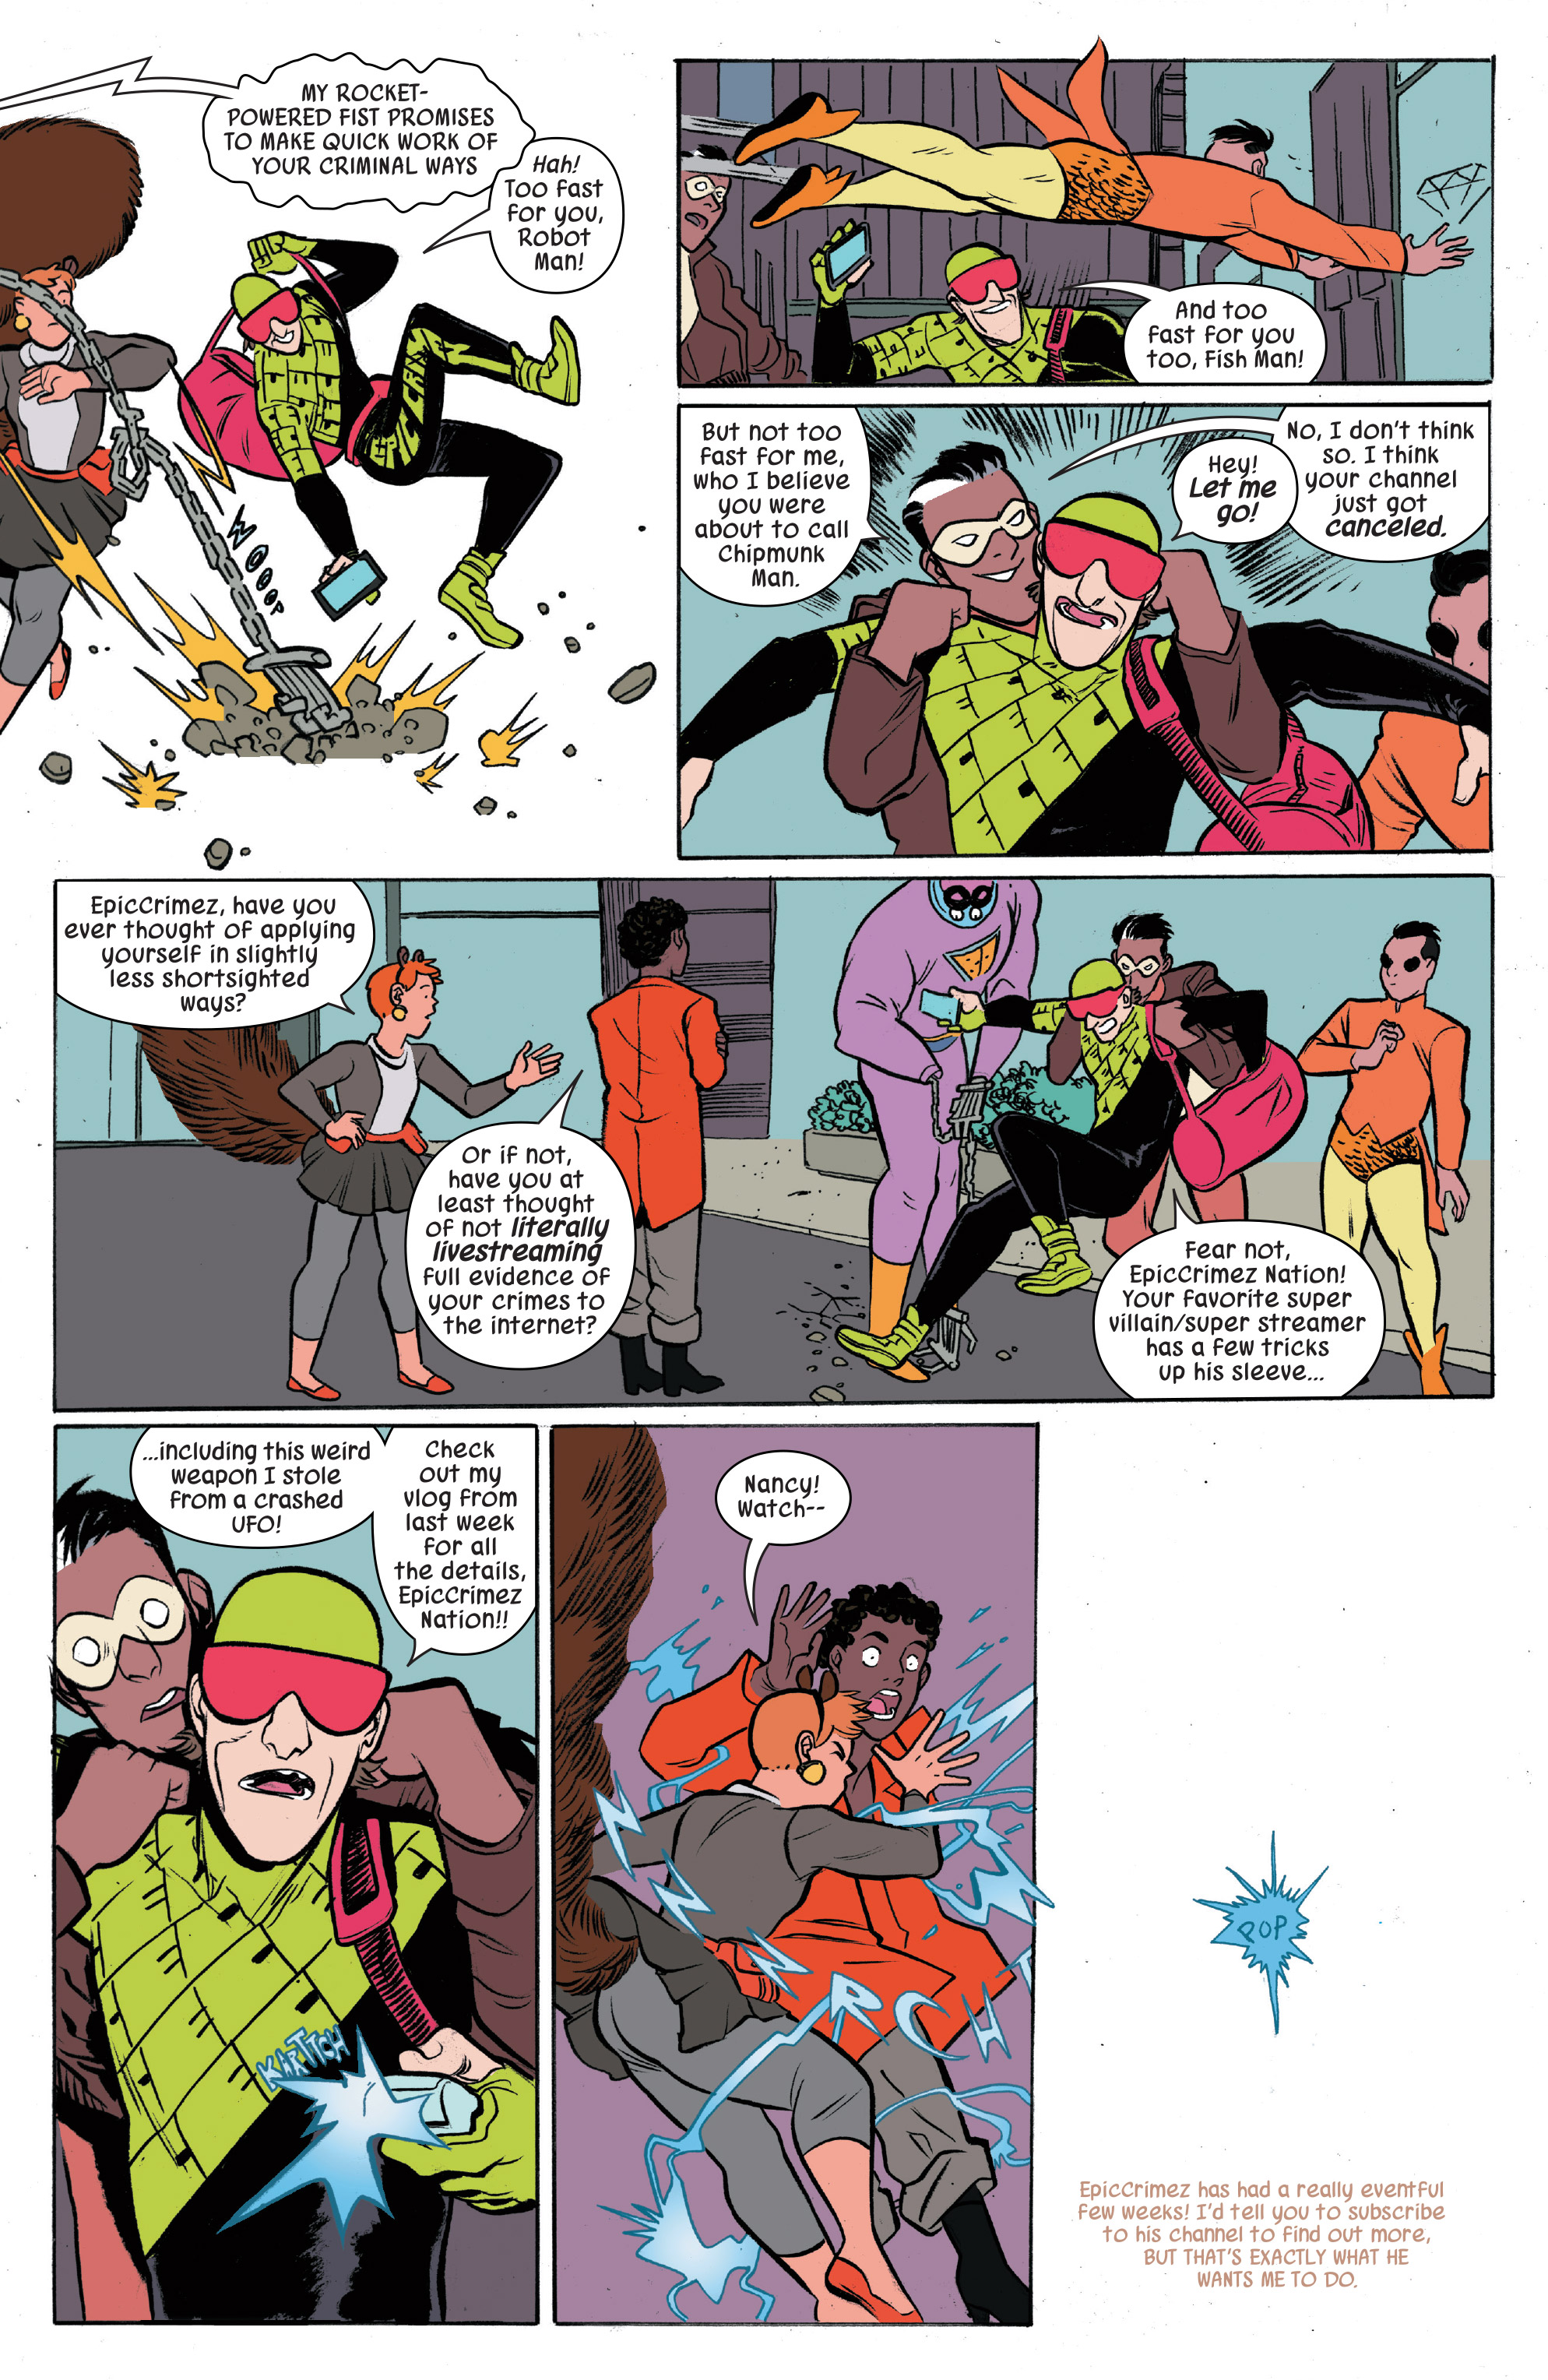 The Unbeatable Squirrel Girl Vol. 2 (2015): Chapter 31 - Page 4